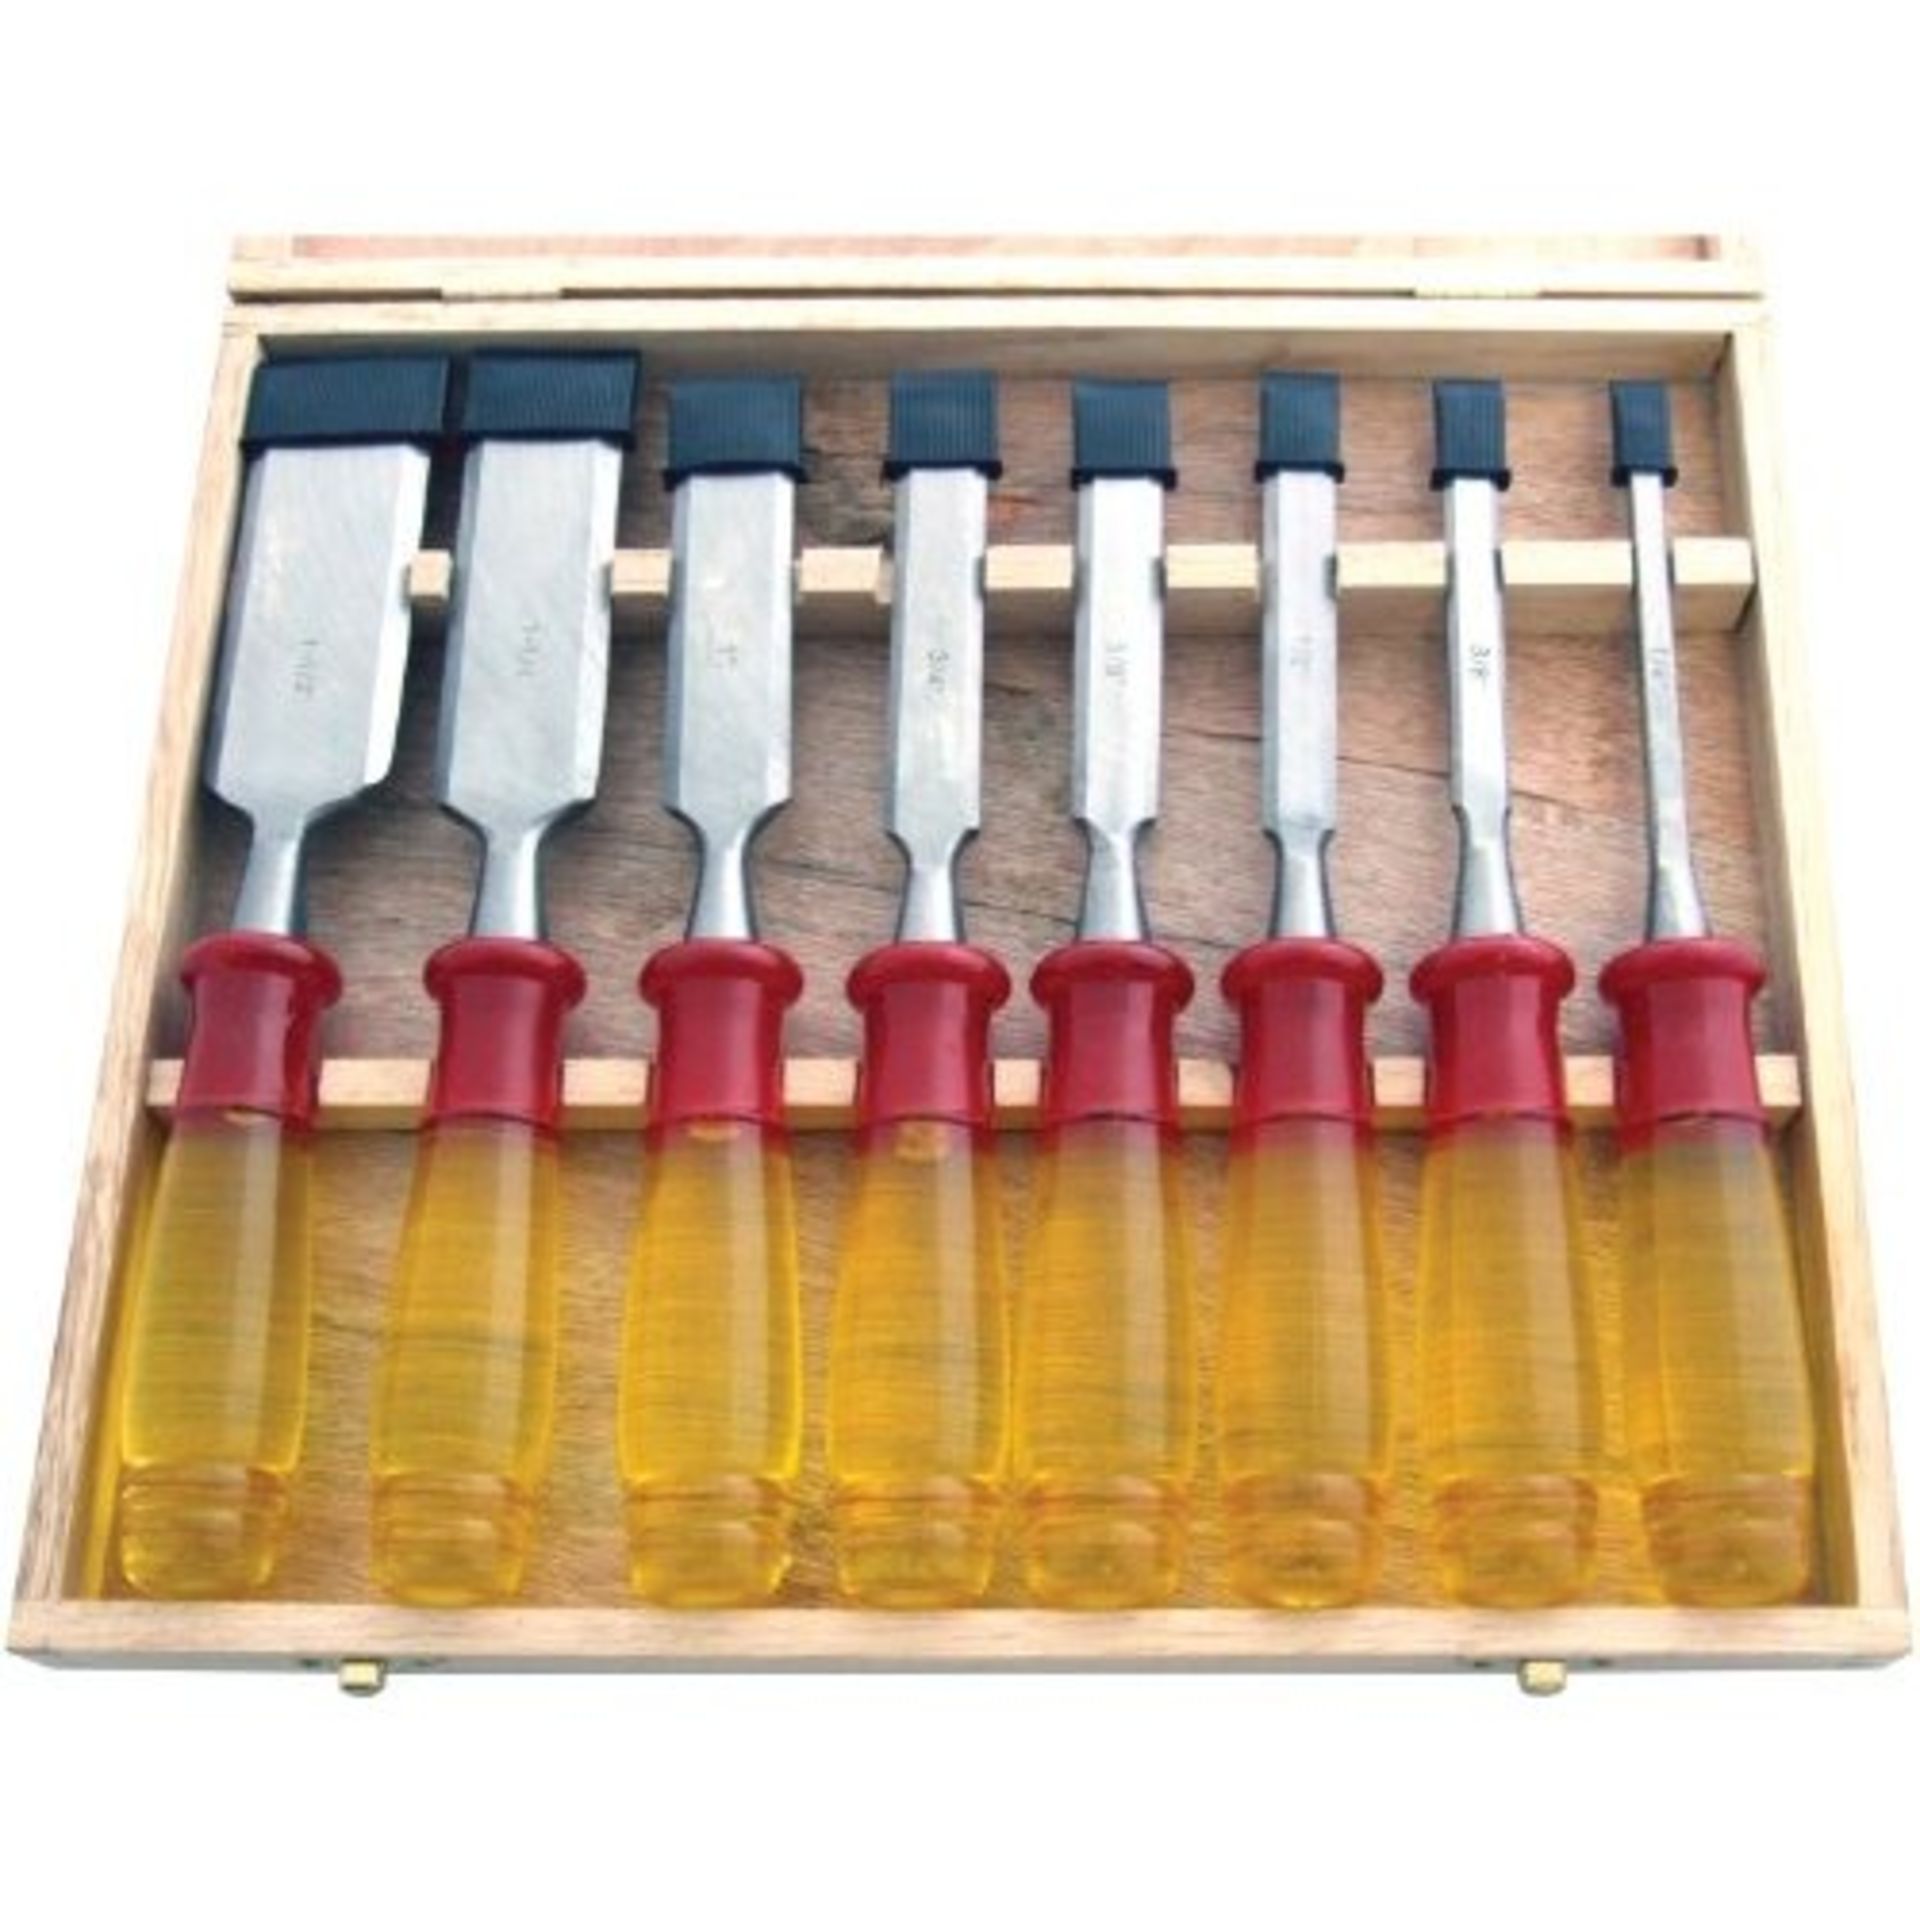 V *TRADE QTY* Brand New Eight Piece Professional Chisel Set With Wooden Storage Case X 4 YOUR BID